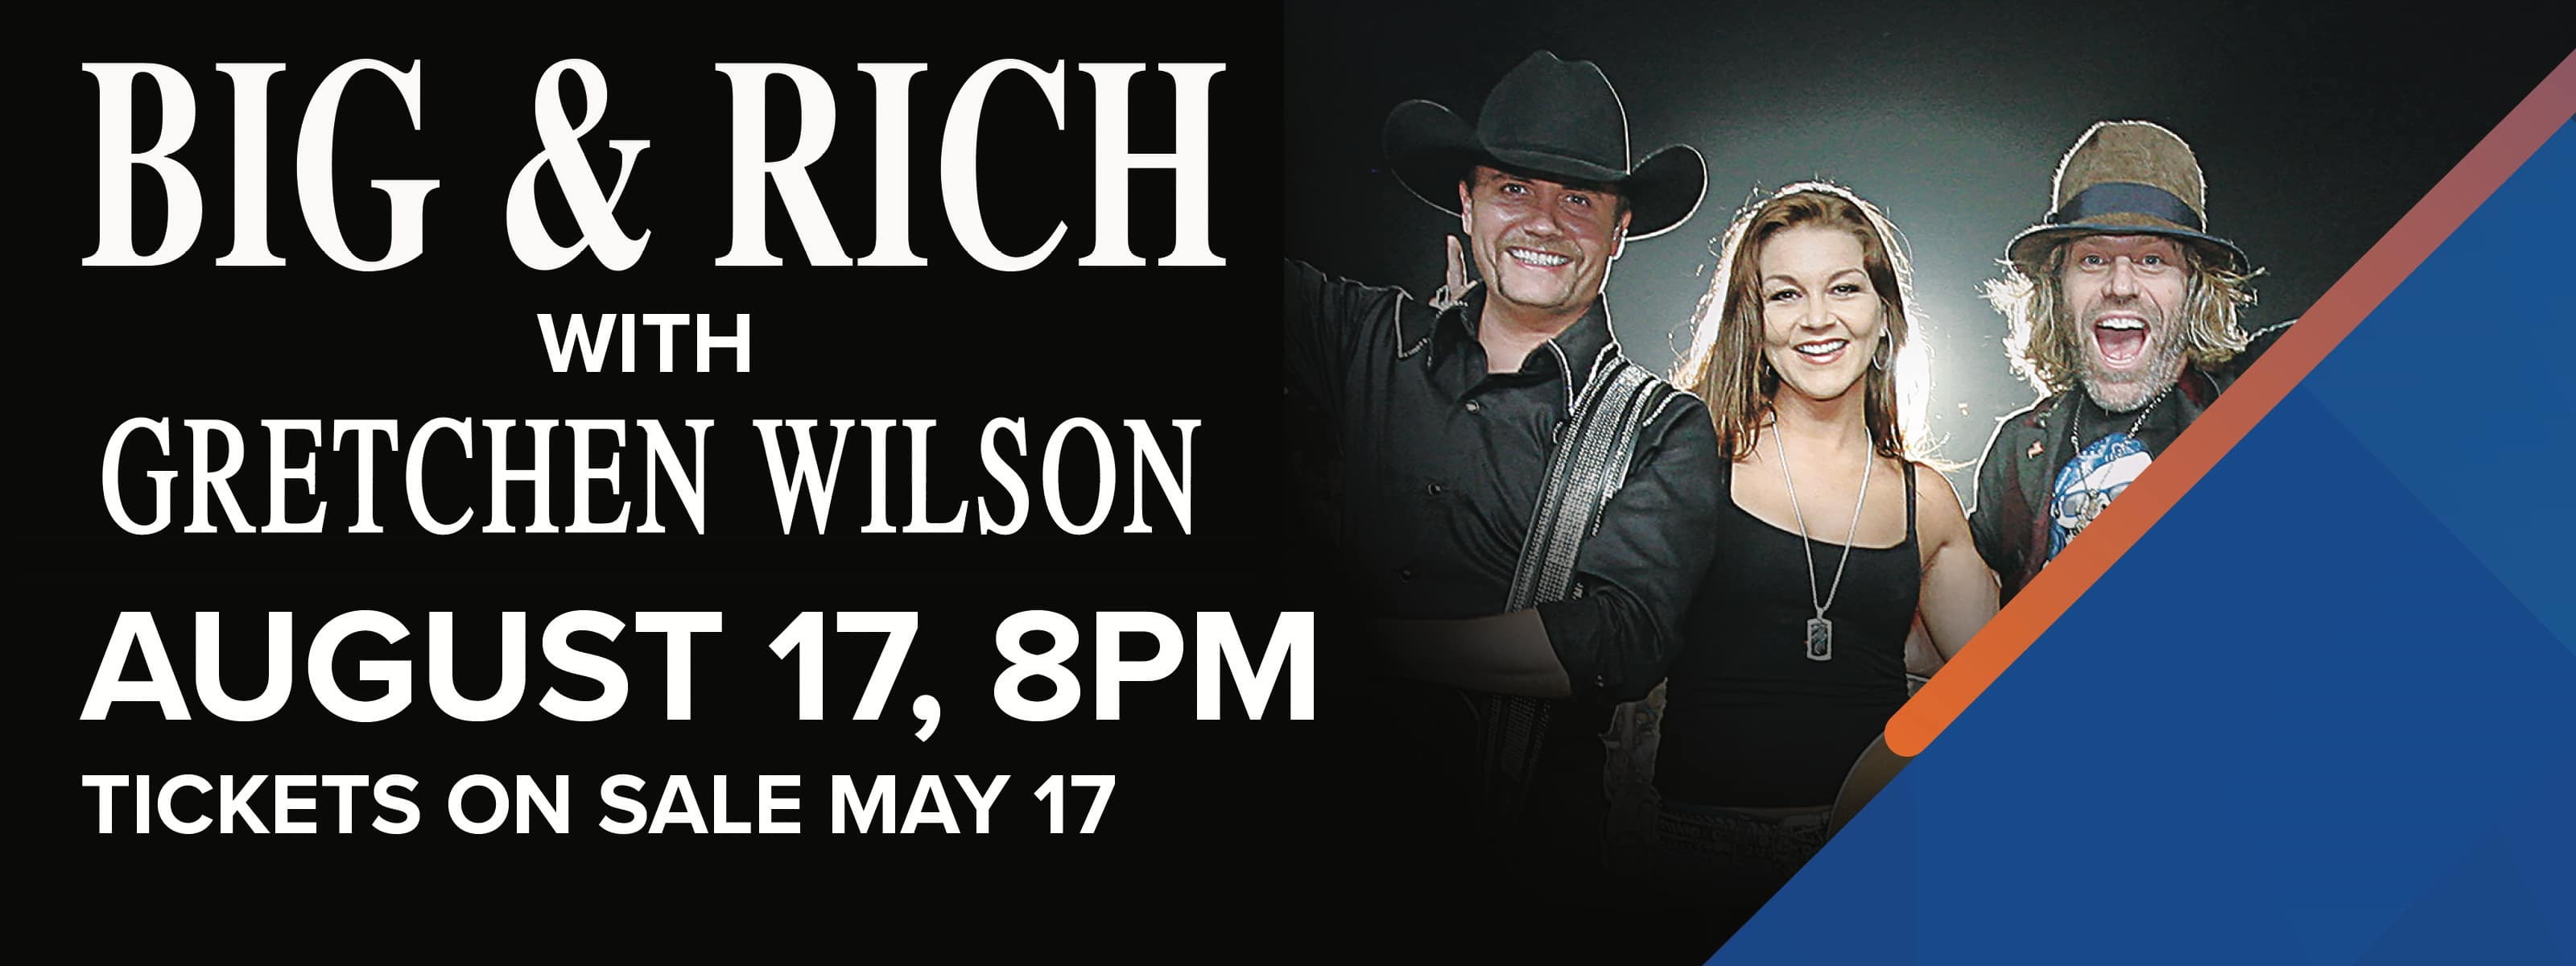 Big & Rich with Gretchen Wilson - August 17, 8pm Tickets On Sale May 17